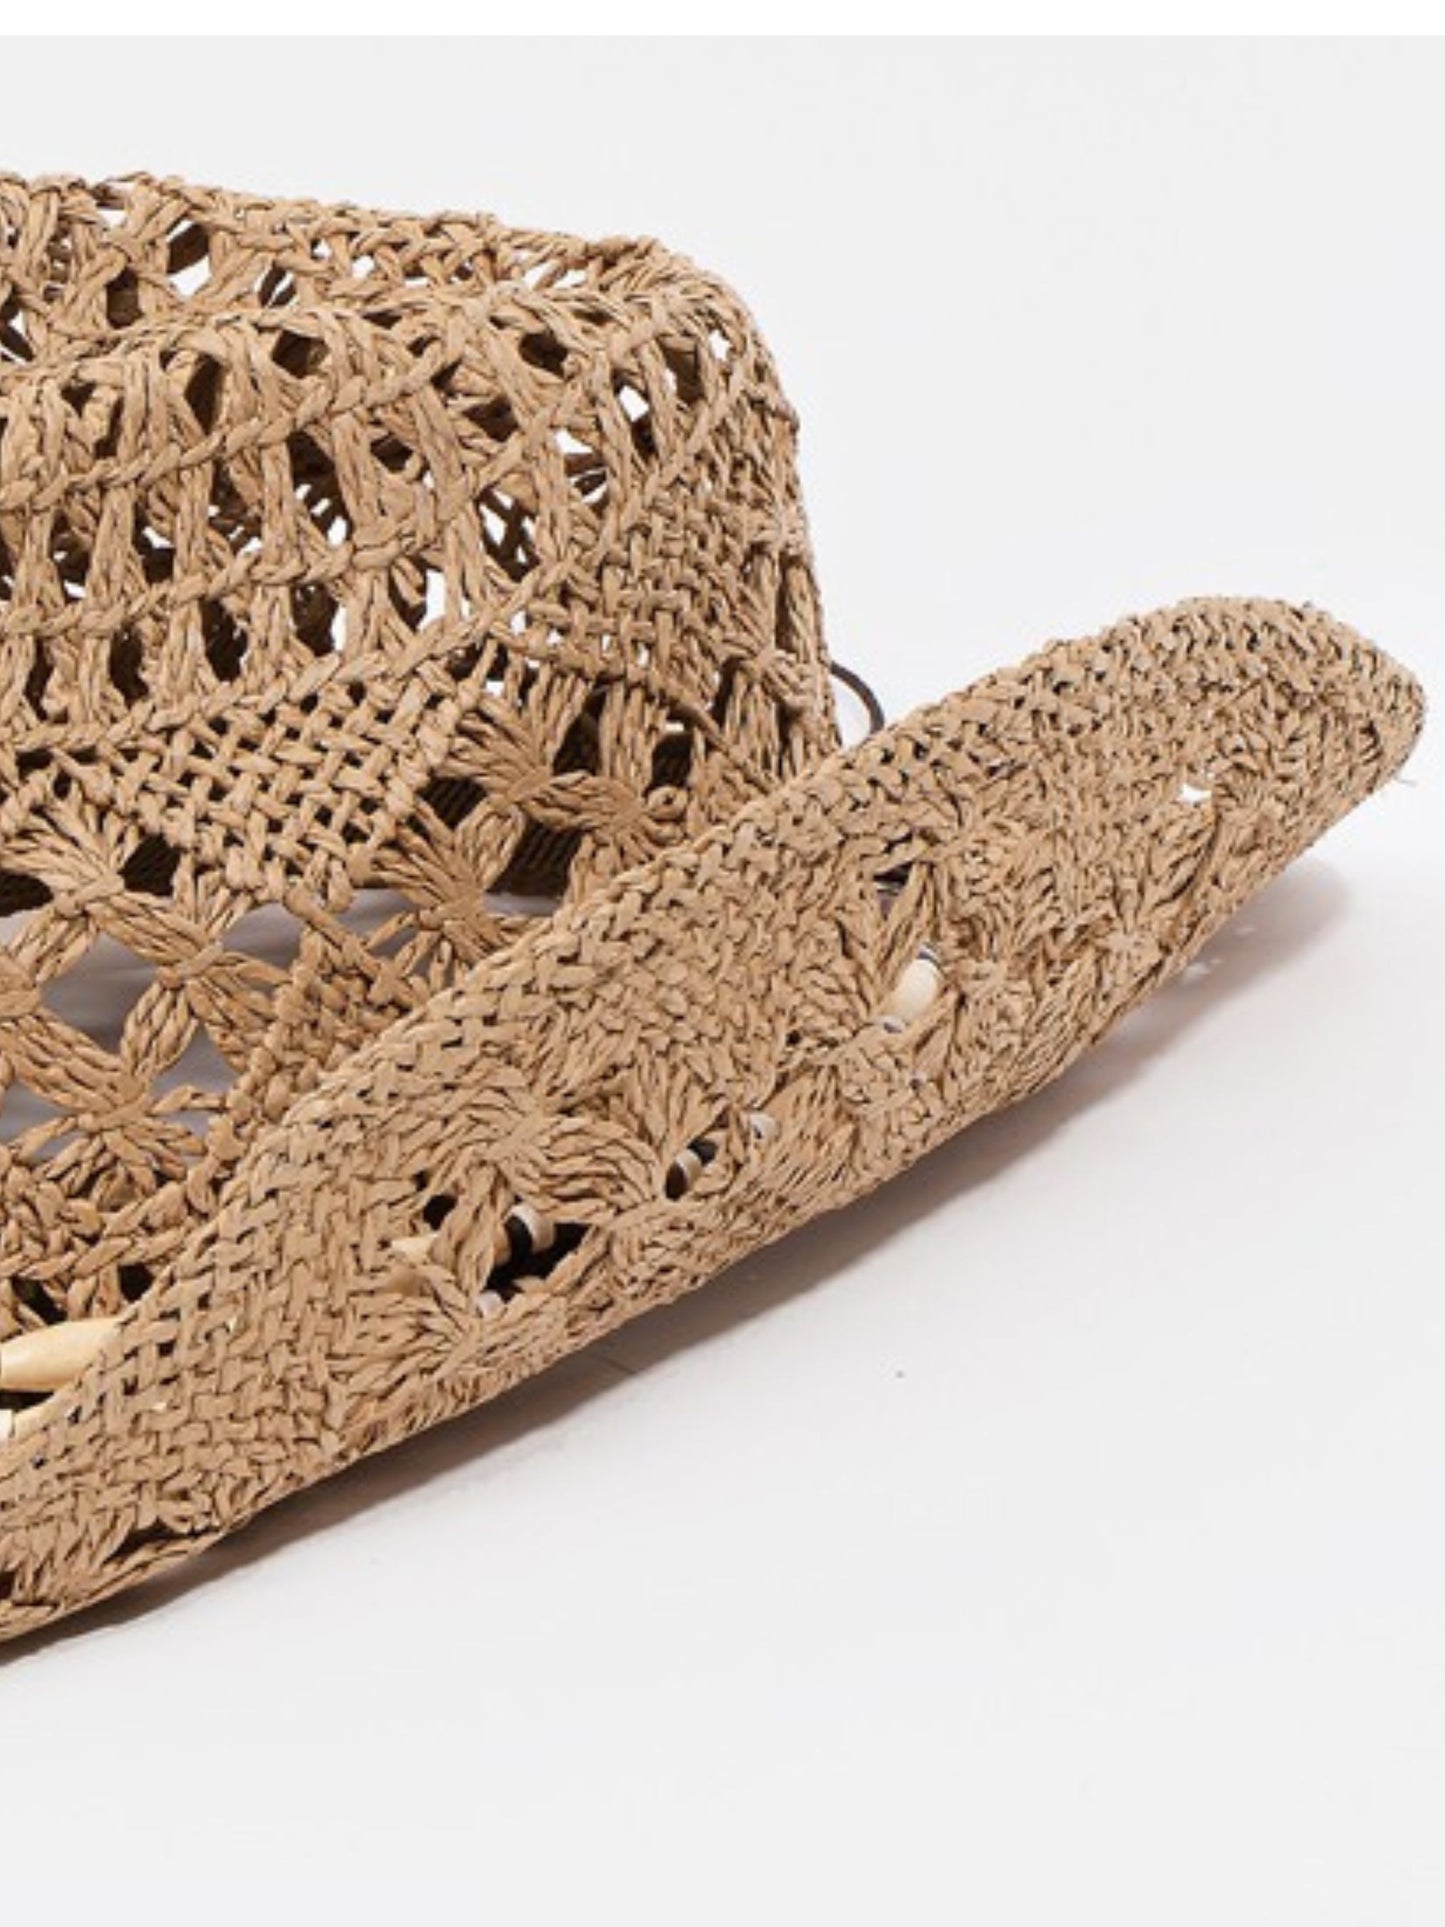 Straw Hat Fame Cutout Strap Weave cowboy desert country style everyday